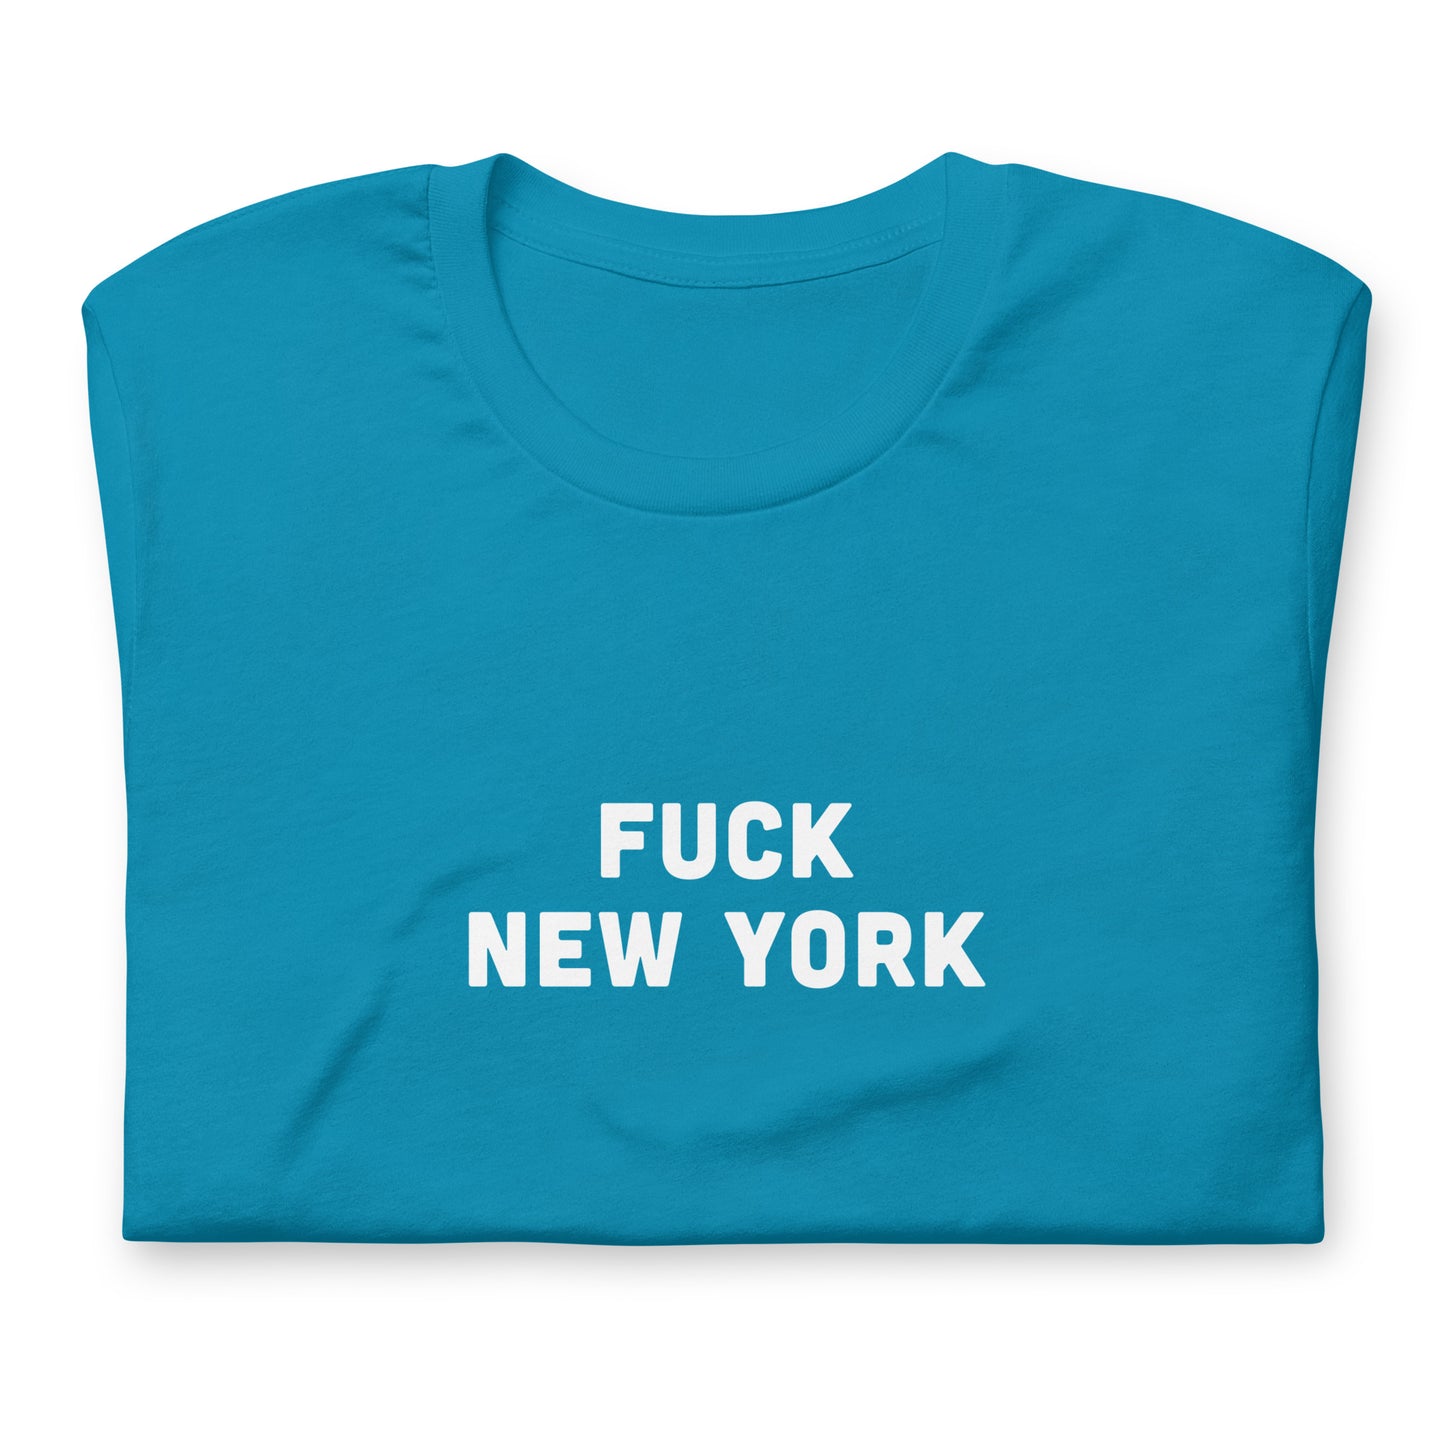 Fuck New York T-Shirt Size M Color Navy